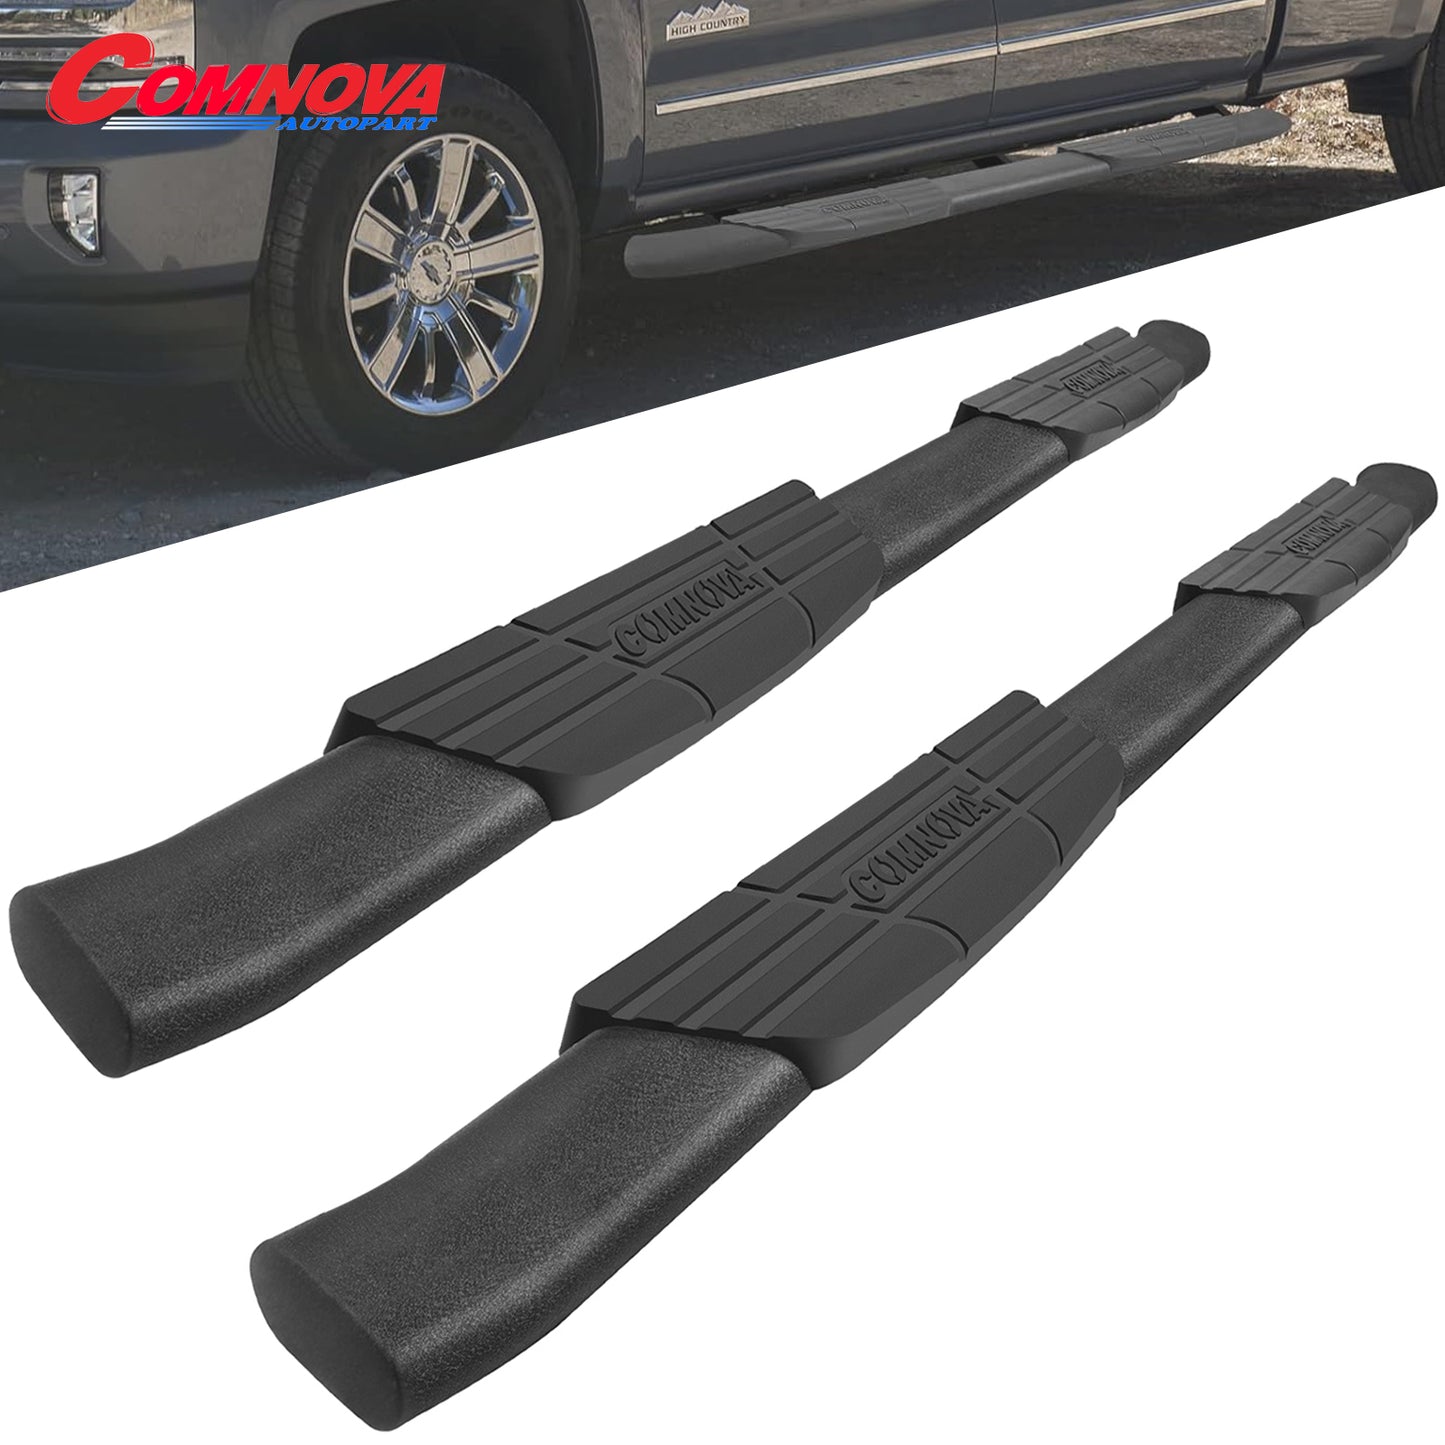 Running Boards Compatible with 2005-2023 Toyota Tacoma Double Cab with 4 Full-Size Doors. Oval Texturel Step Rails Side Steps 9X Style. - COMNOVA AUTOPART